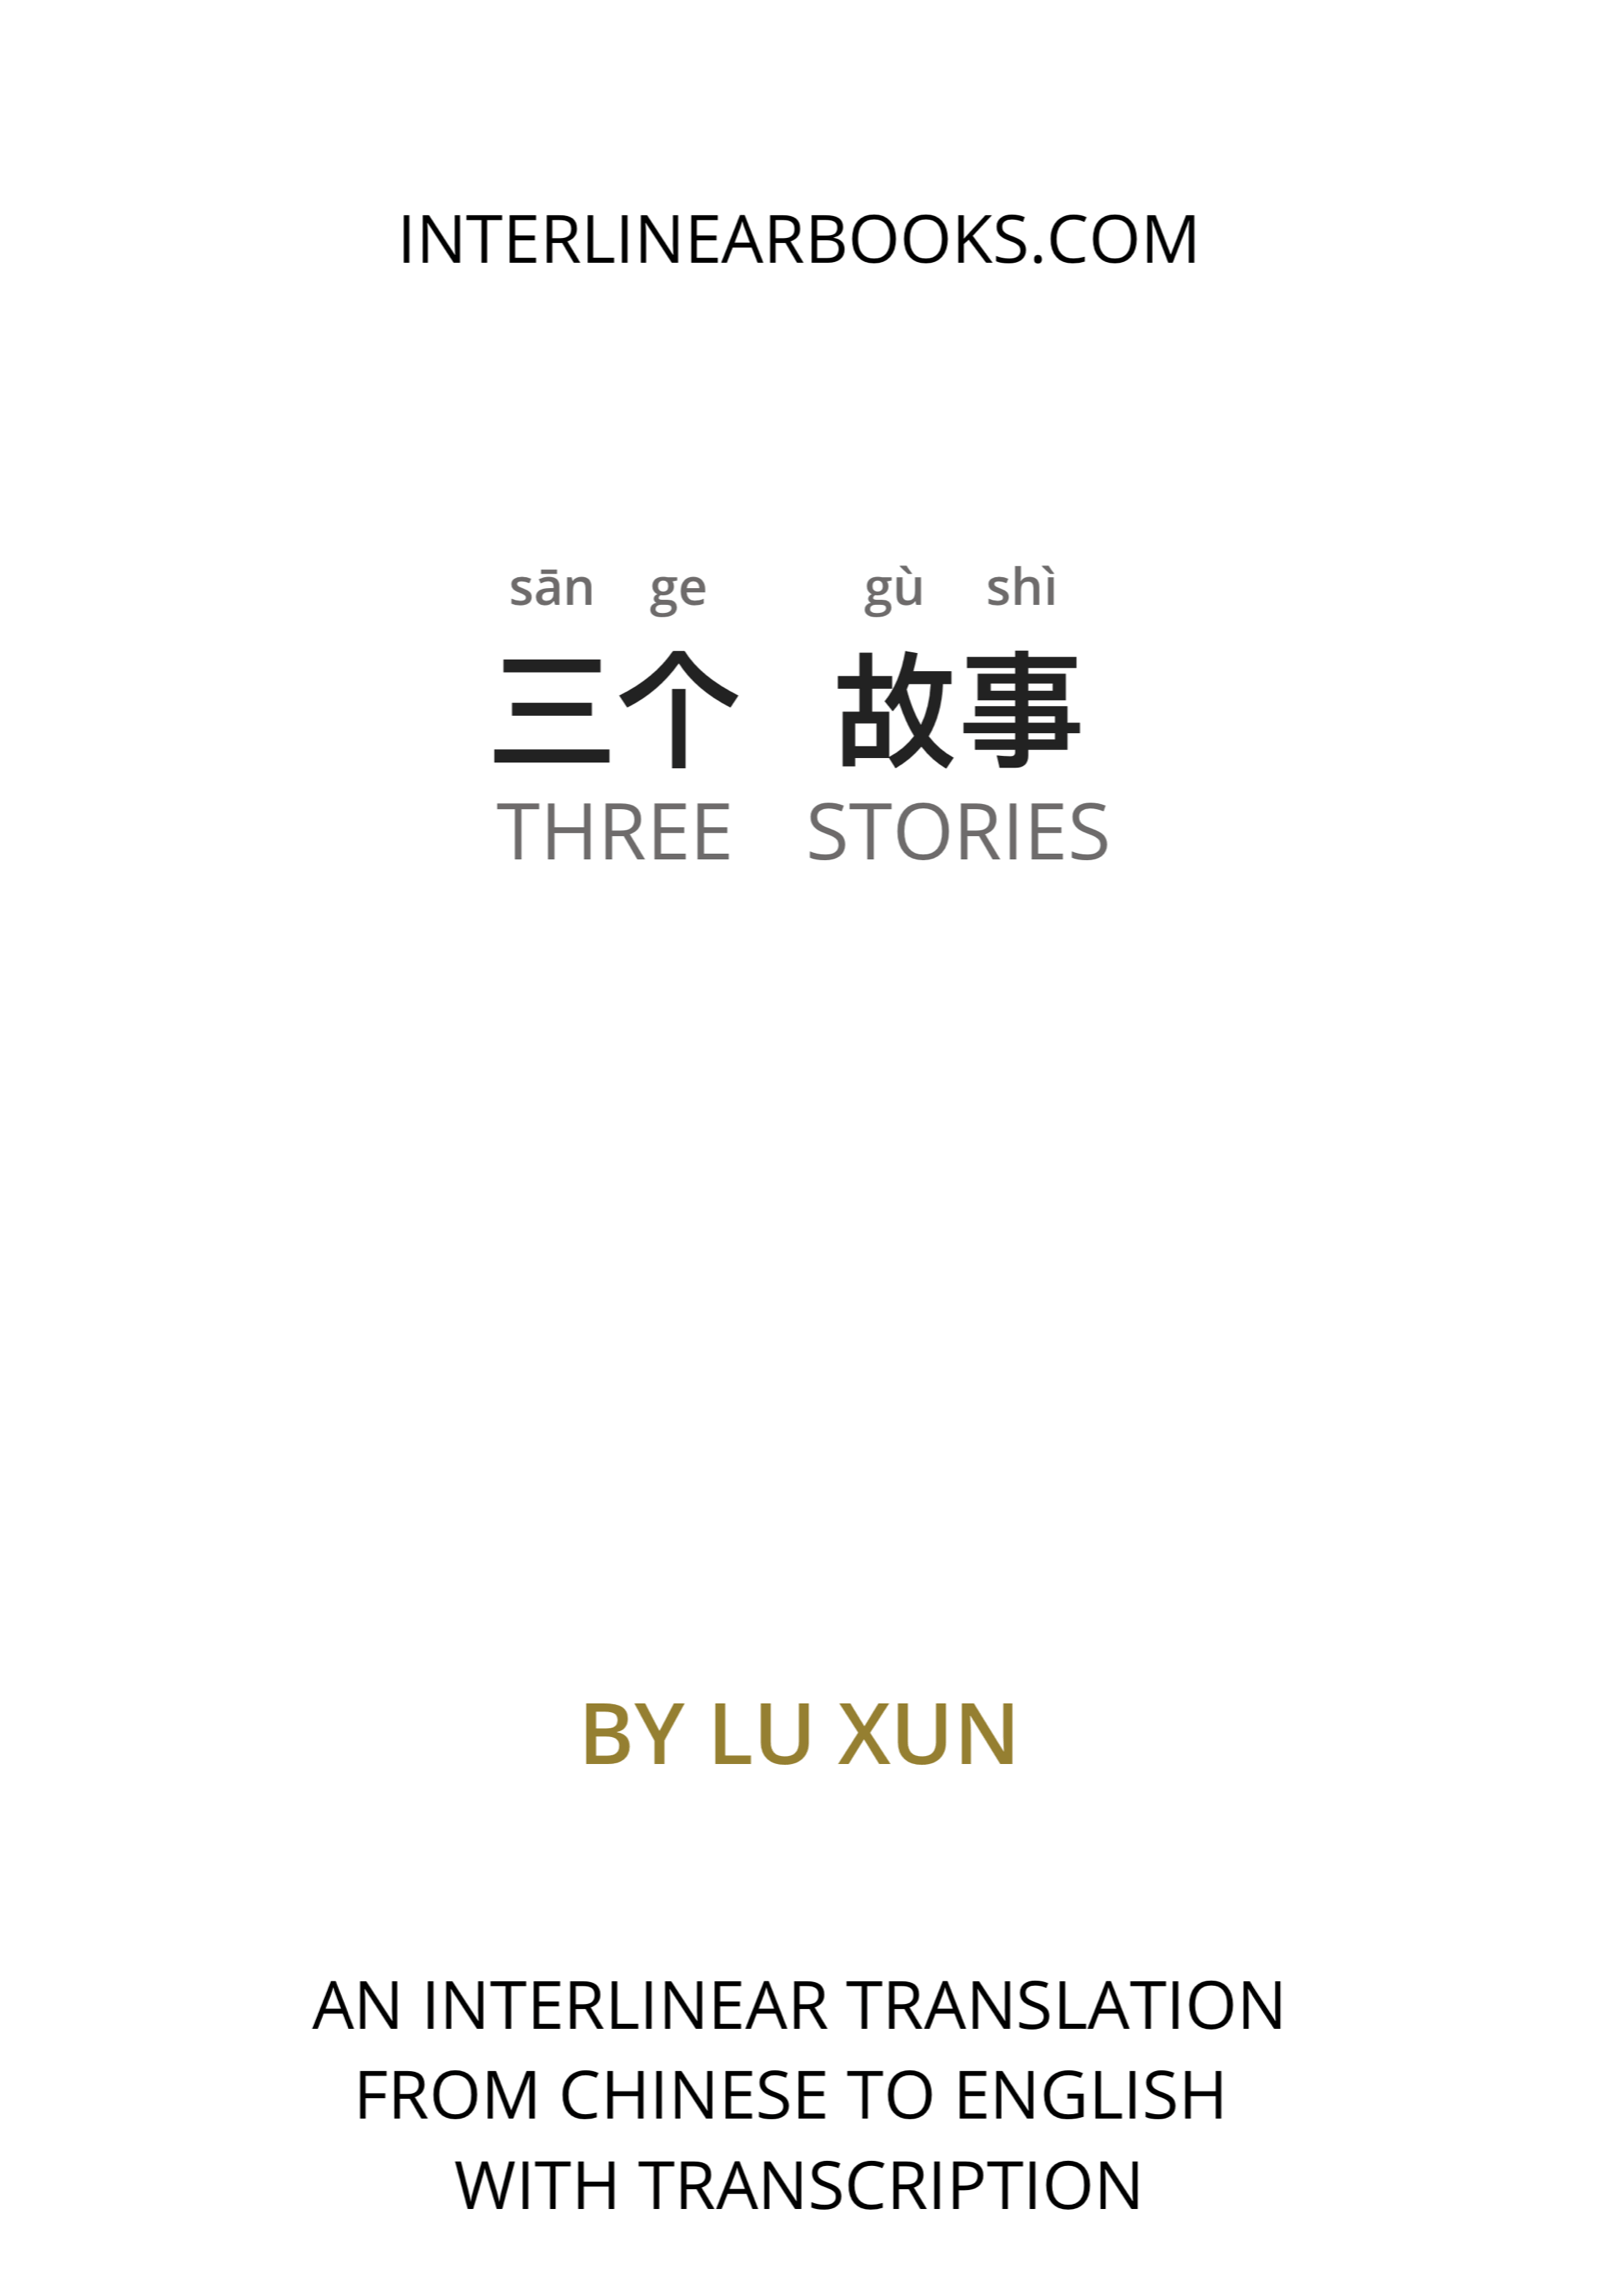 Chinese book: 三个故事ٍ / Three Stories